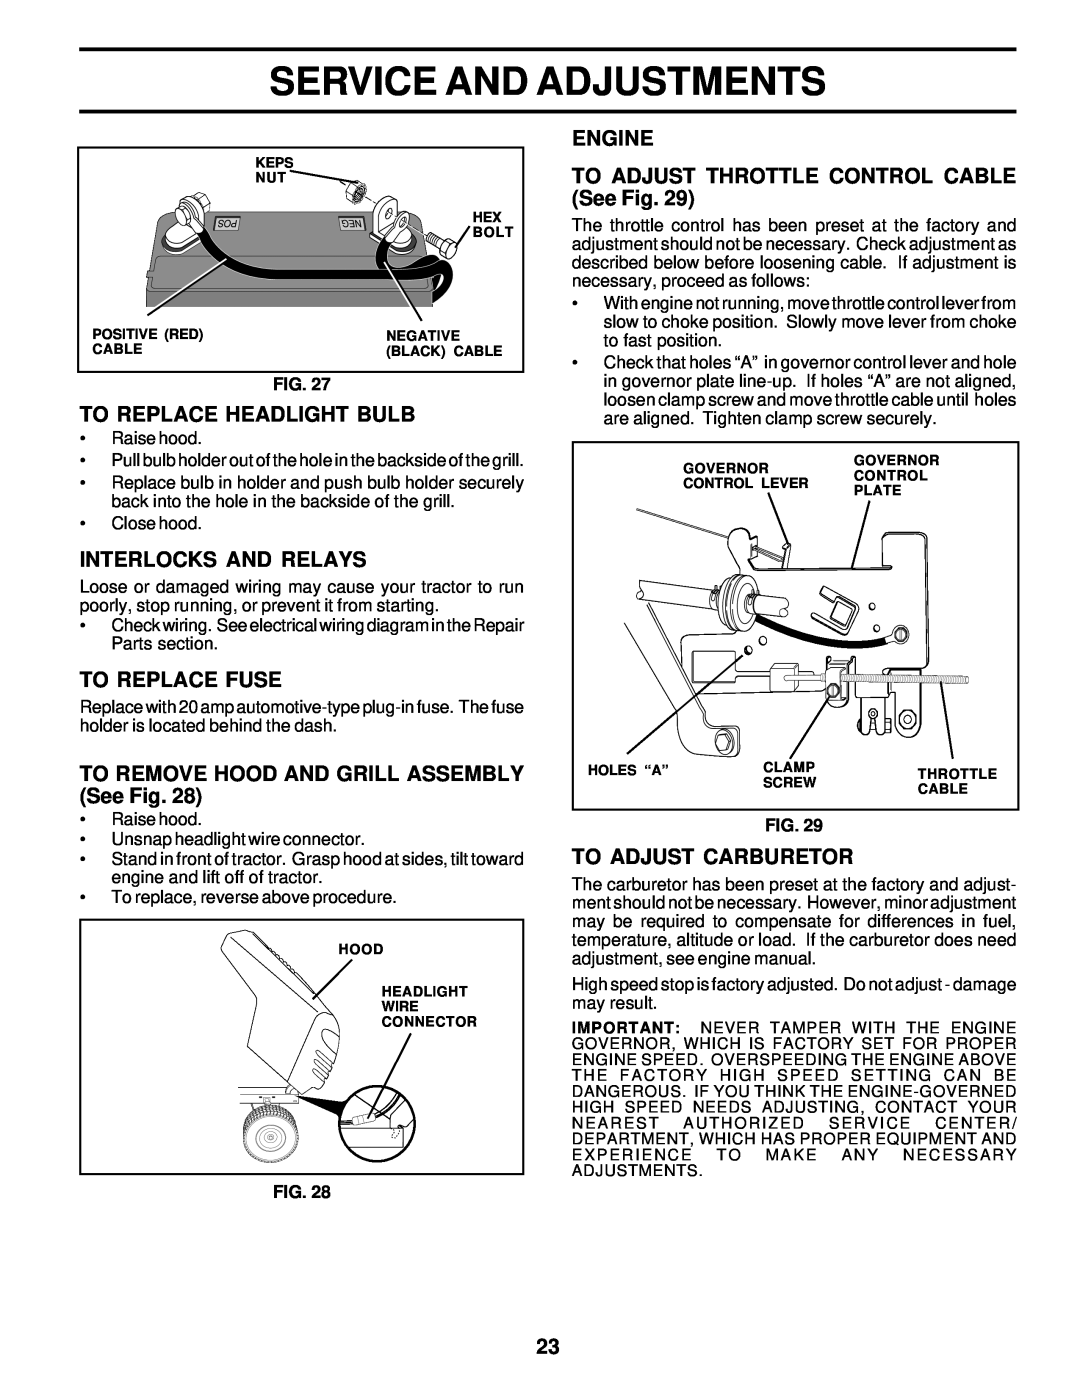 Weed Eater WE16542D owner manual To Replace Headlight Bulb, Interlocks And Relays, To Replace Fuse, To Adjust Carburetor 